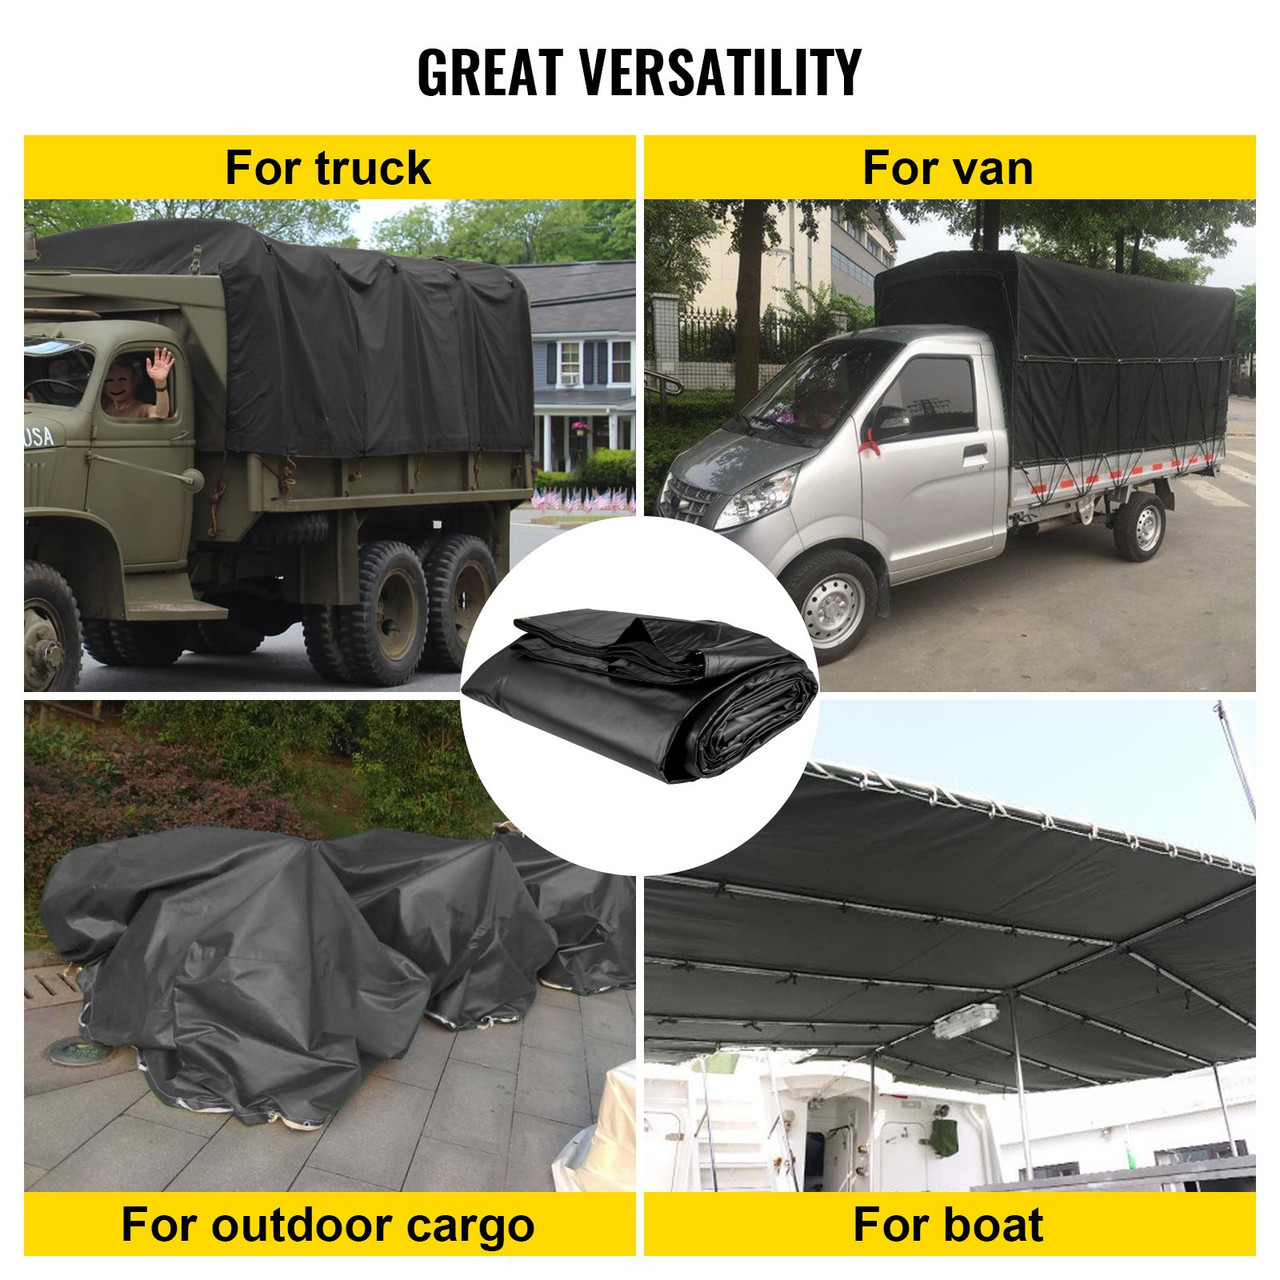 Flatbed Tarps, 18OZ Flatbed Truck Tarp, 16x24 Ft Polyethylene Lumber Tarp, Black Heavy Duty Trailer Tarp with Stainless Steel D Rings For Trucks, Vans, Small Boats, Machinery & Outdoor Materials